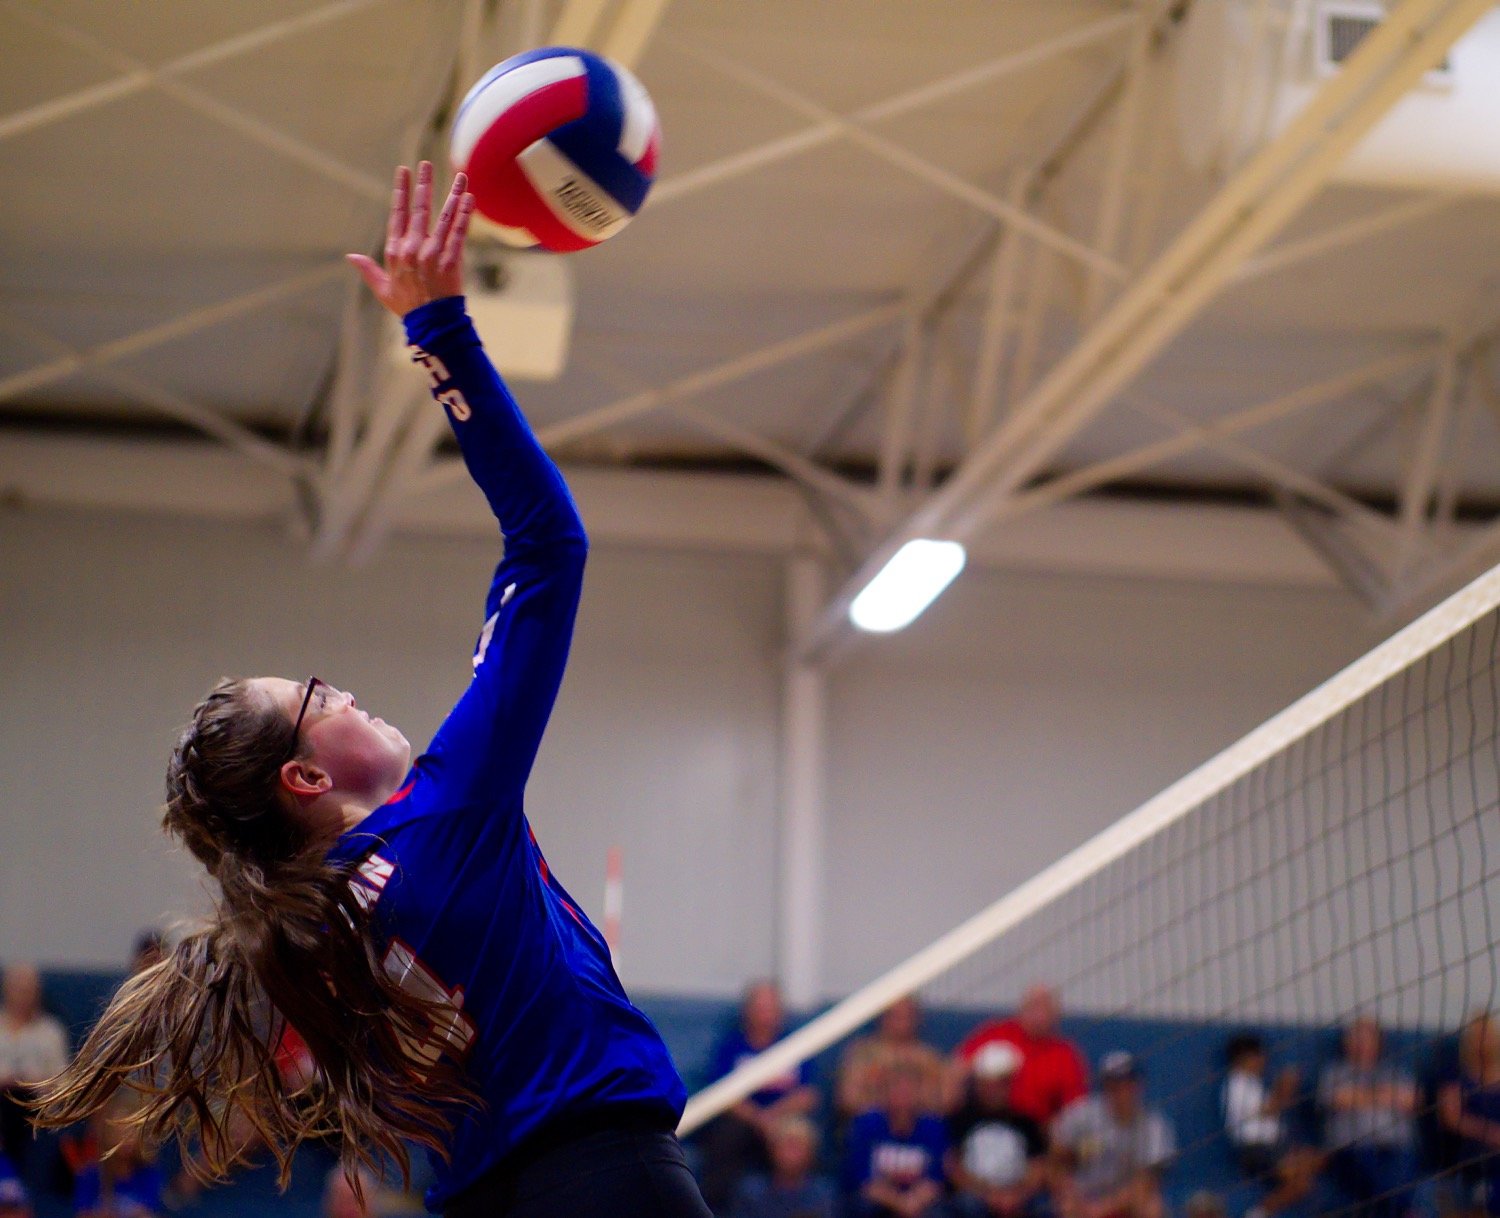 Emilee Baker goes in for the kill. [view more volleyball shots]